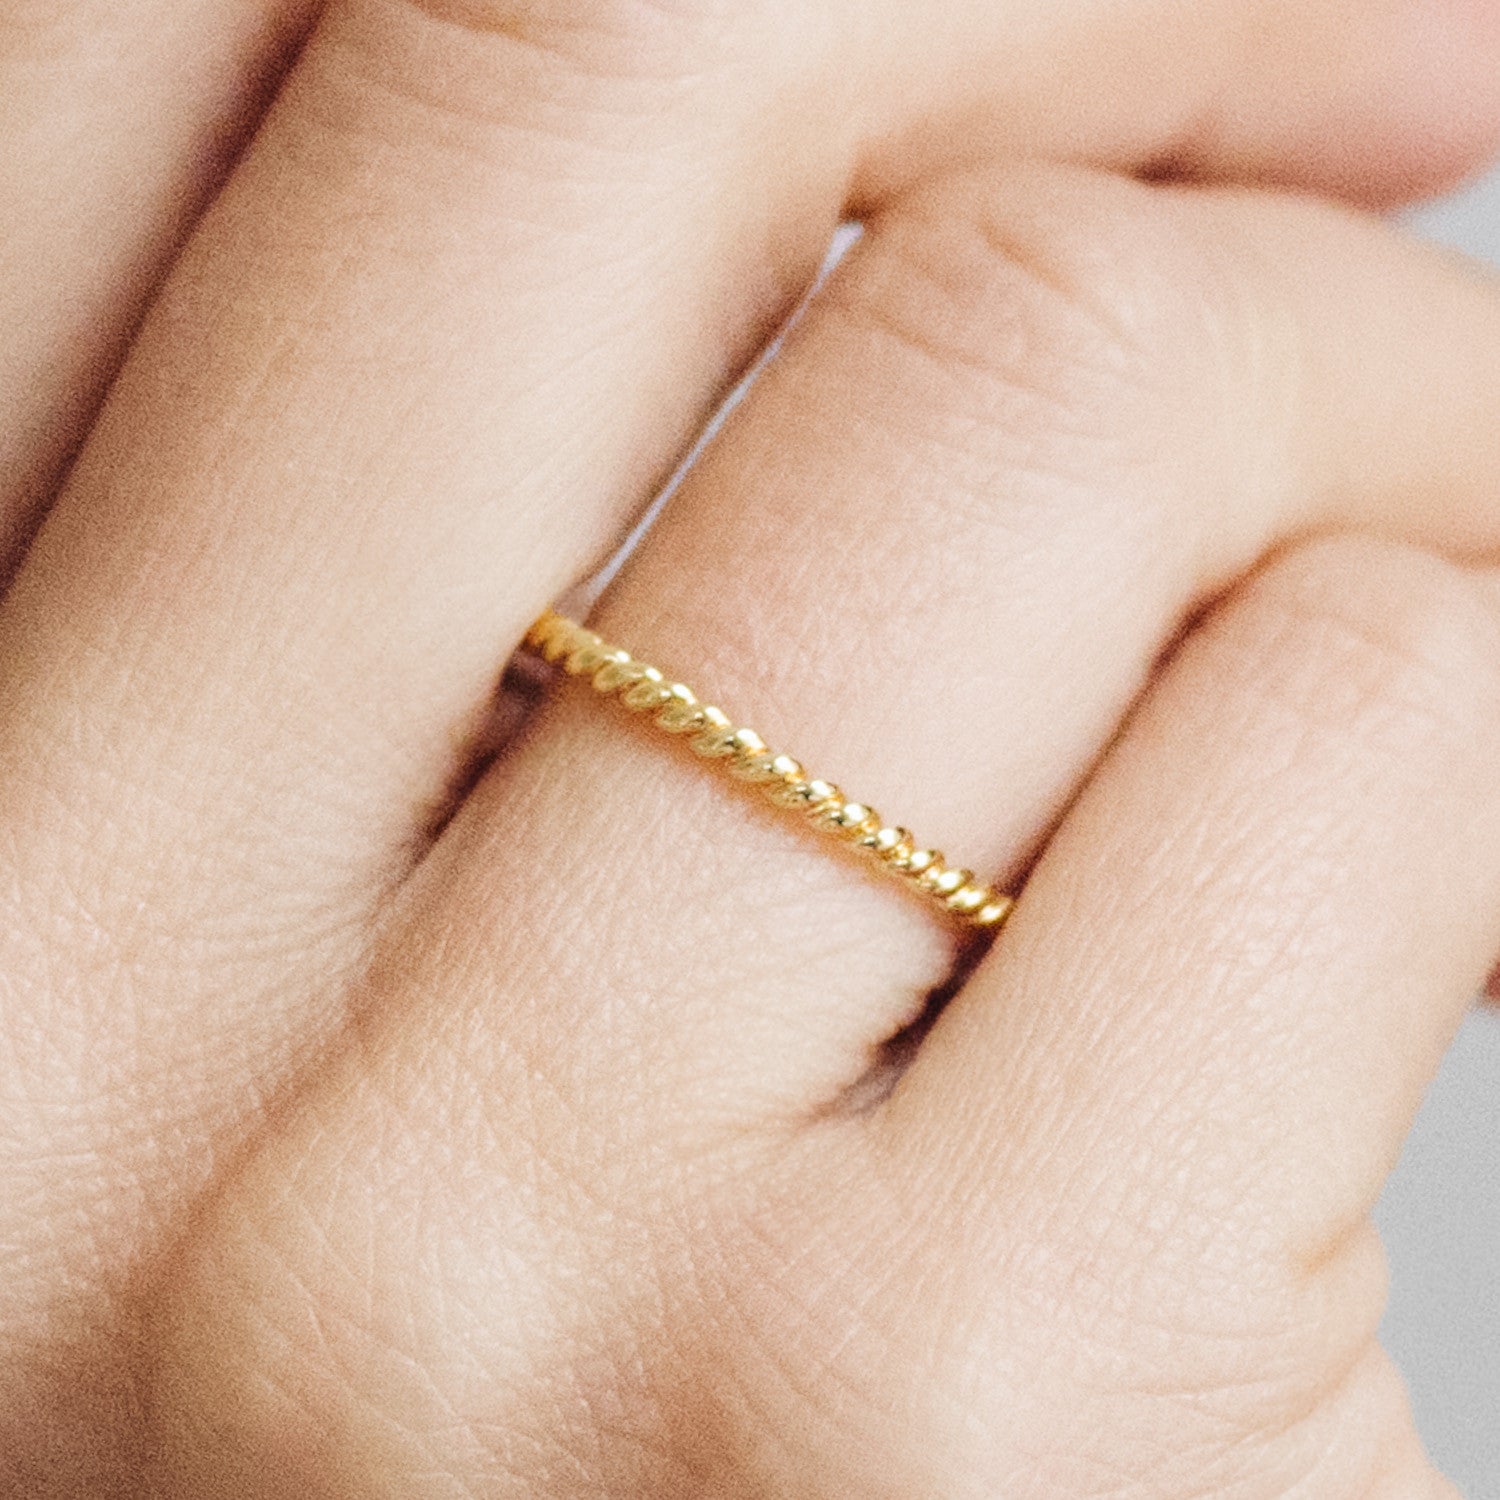 Gold Braided Wedding Rings, Fields of Wheat Rings